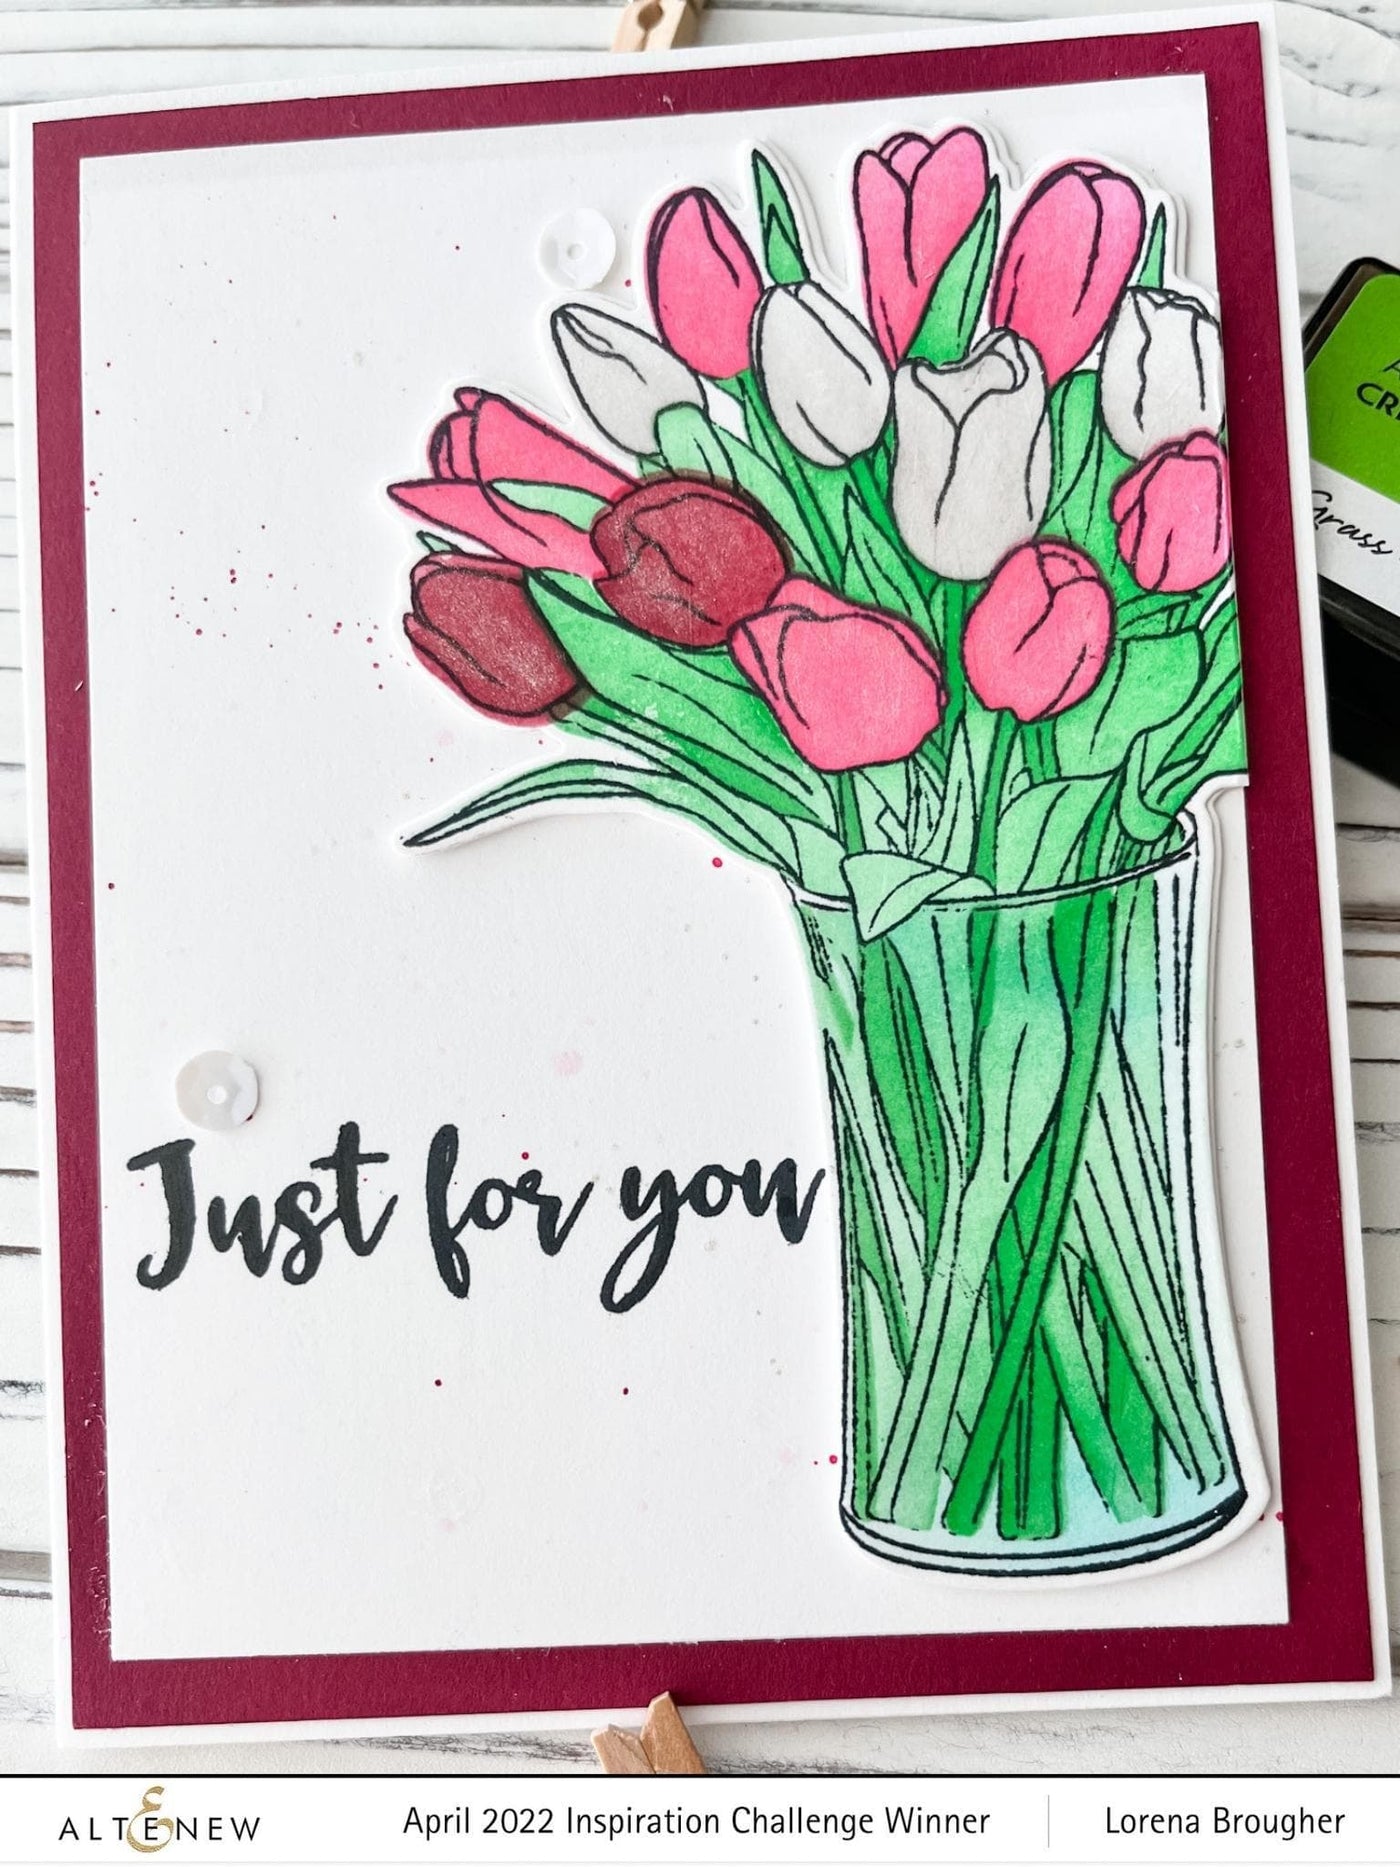 EXP Factors Stencil Timeless Tulips Simple Coloring Stencil Set (3 in 1)